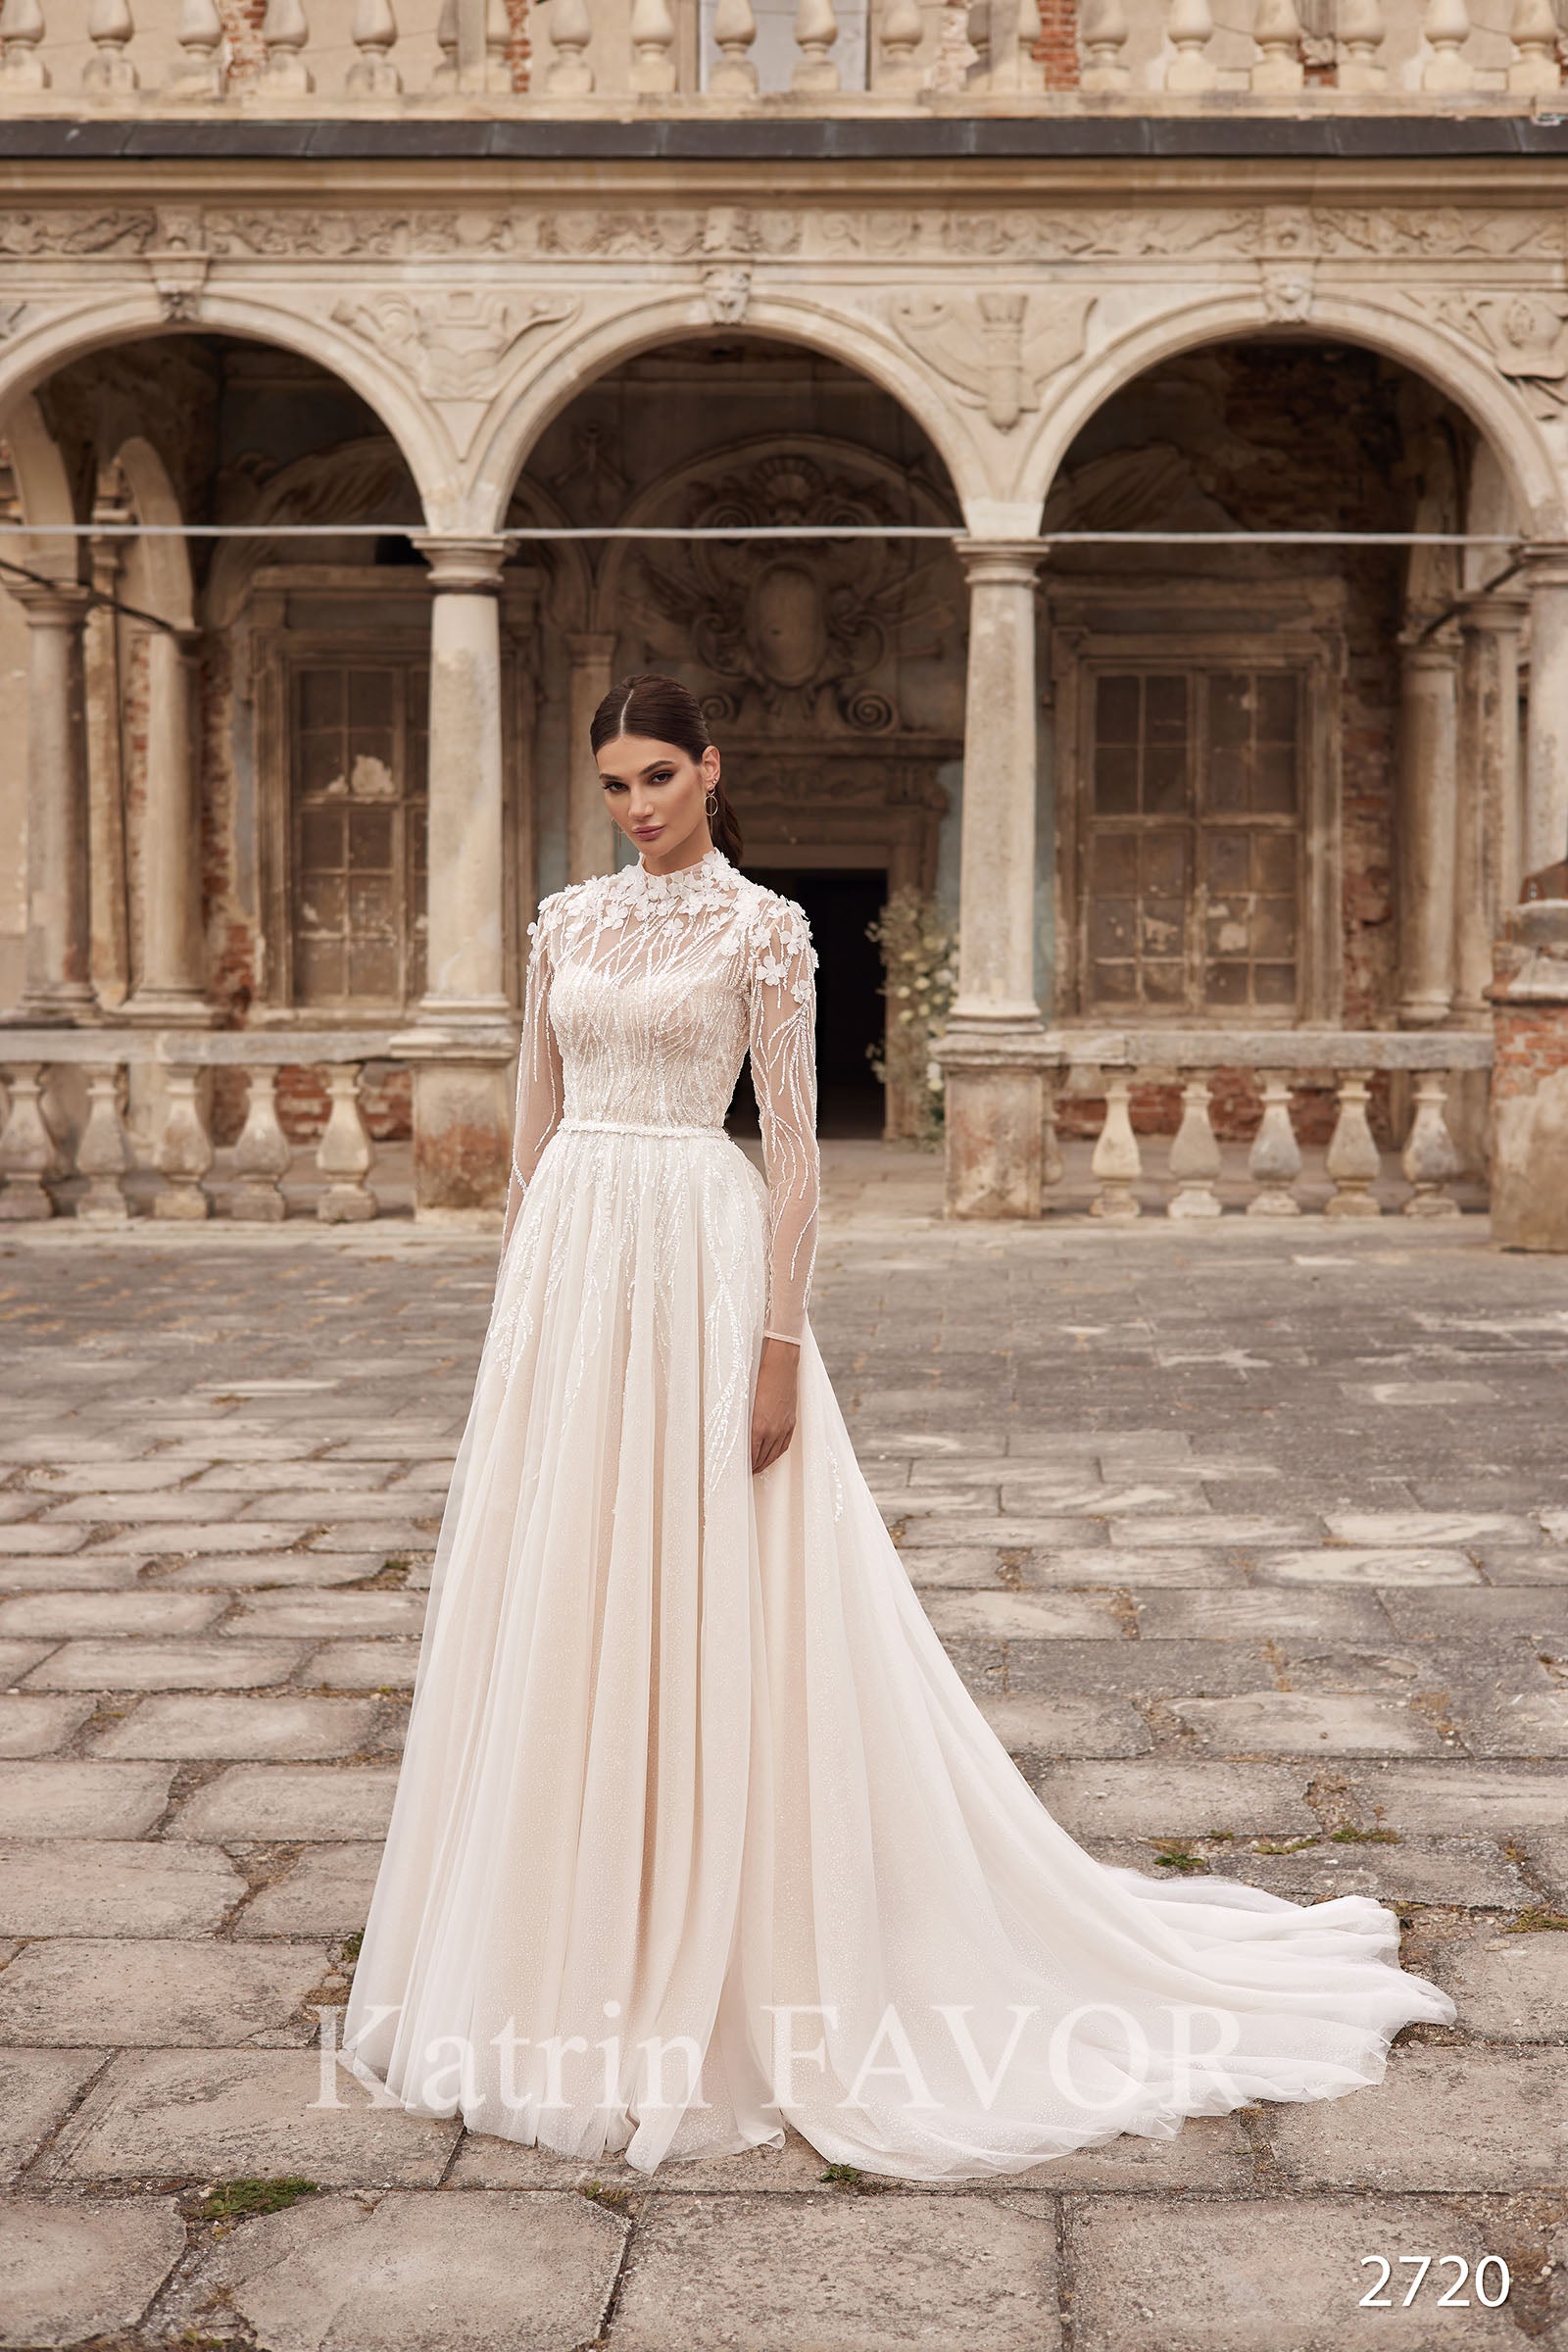 KatrinFAVORboutique-Two piece long sleeve wedding dress